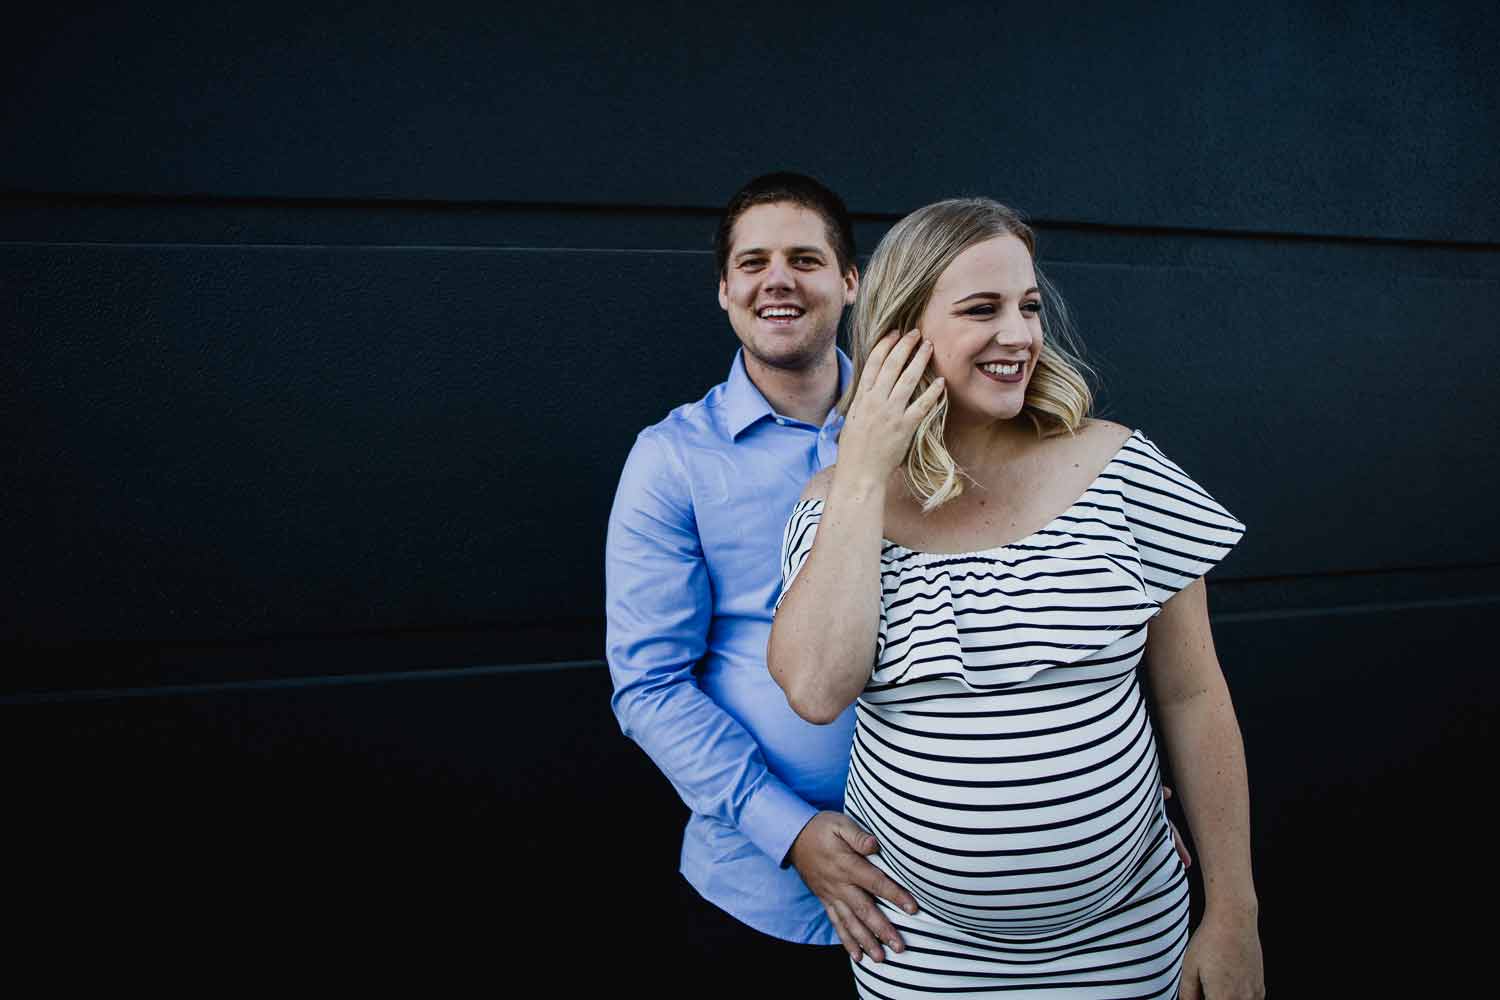 Our Maternity Shoot